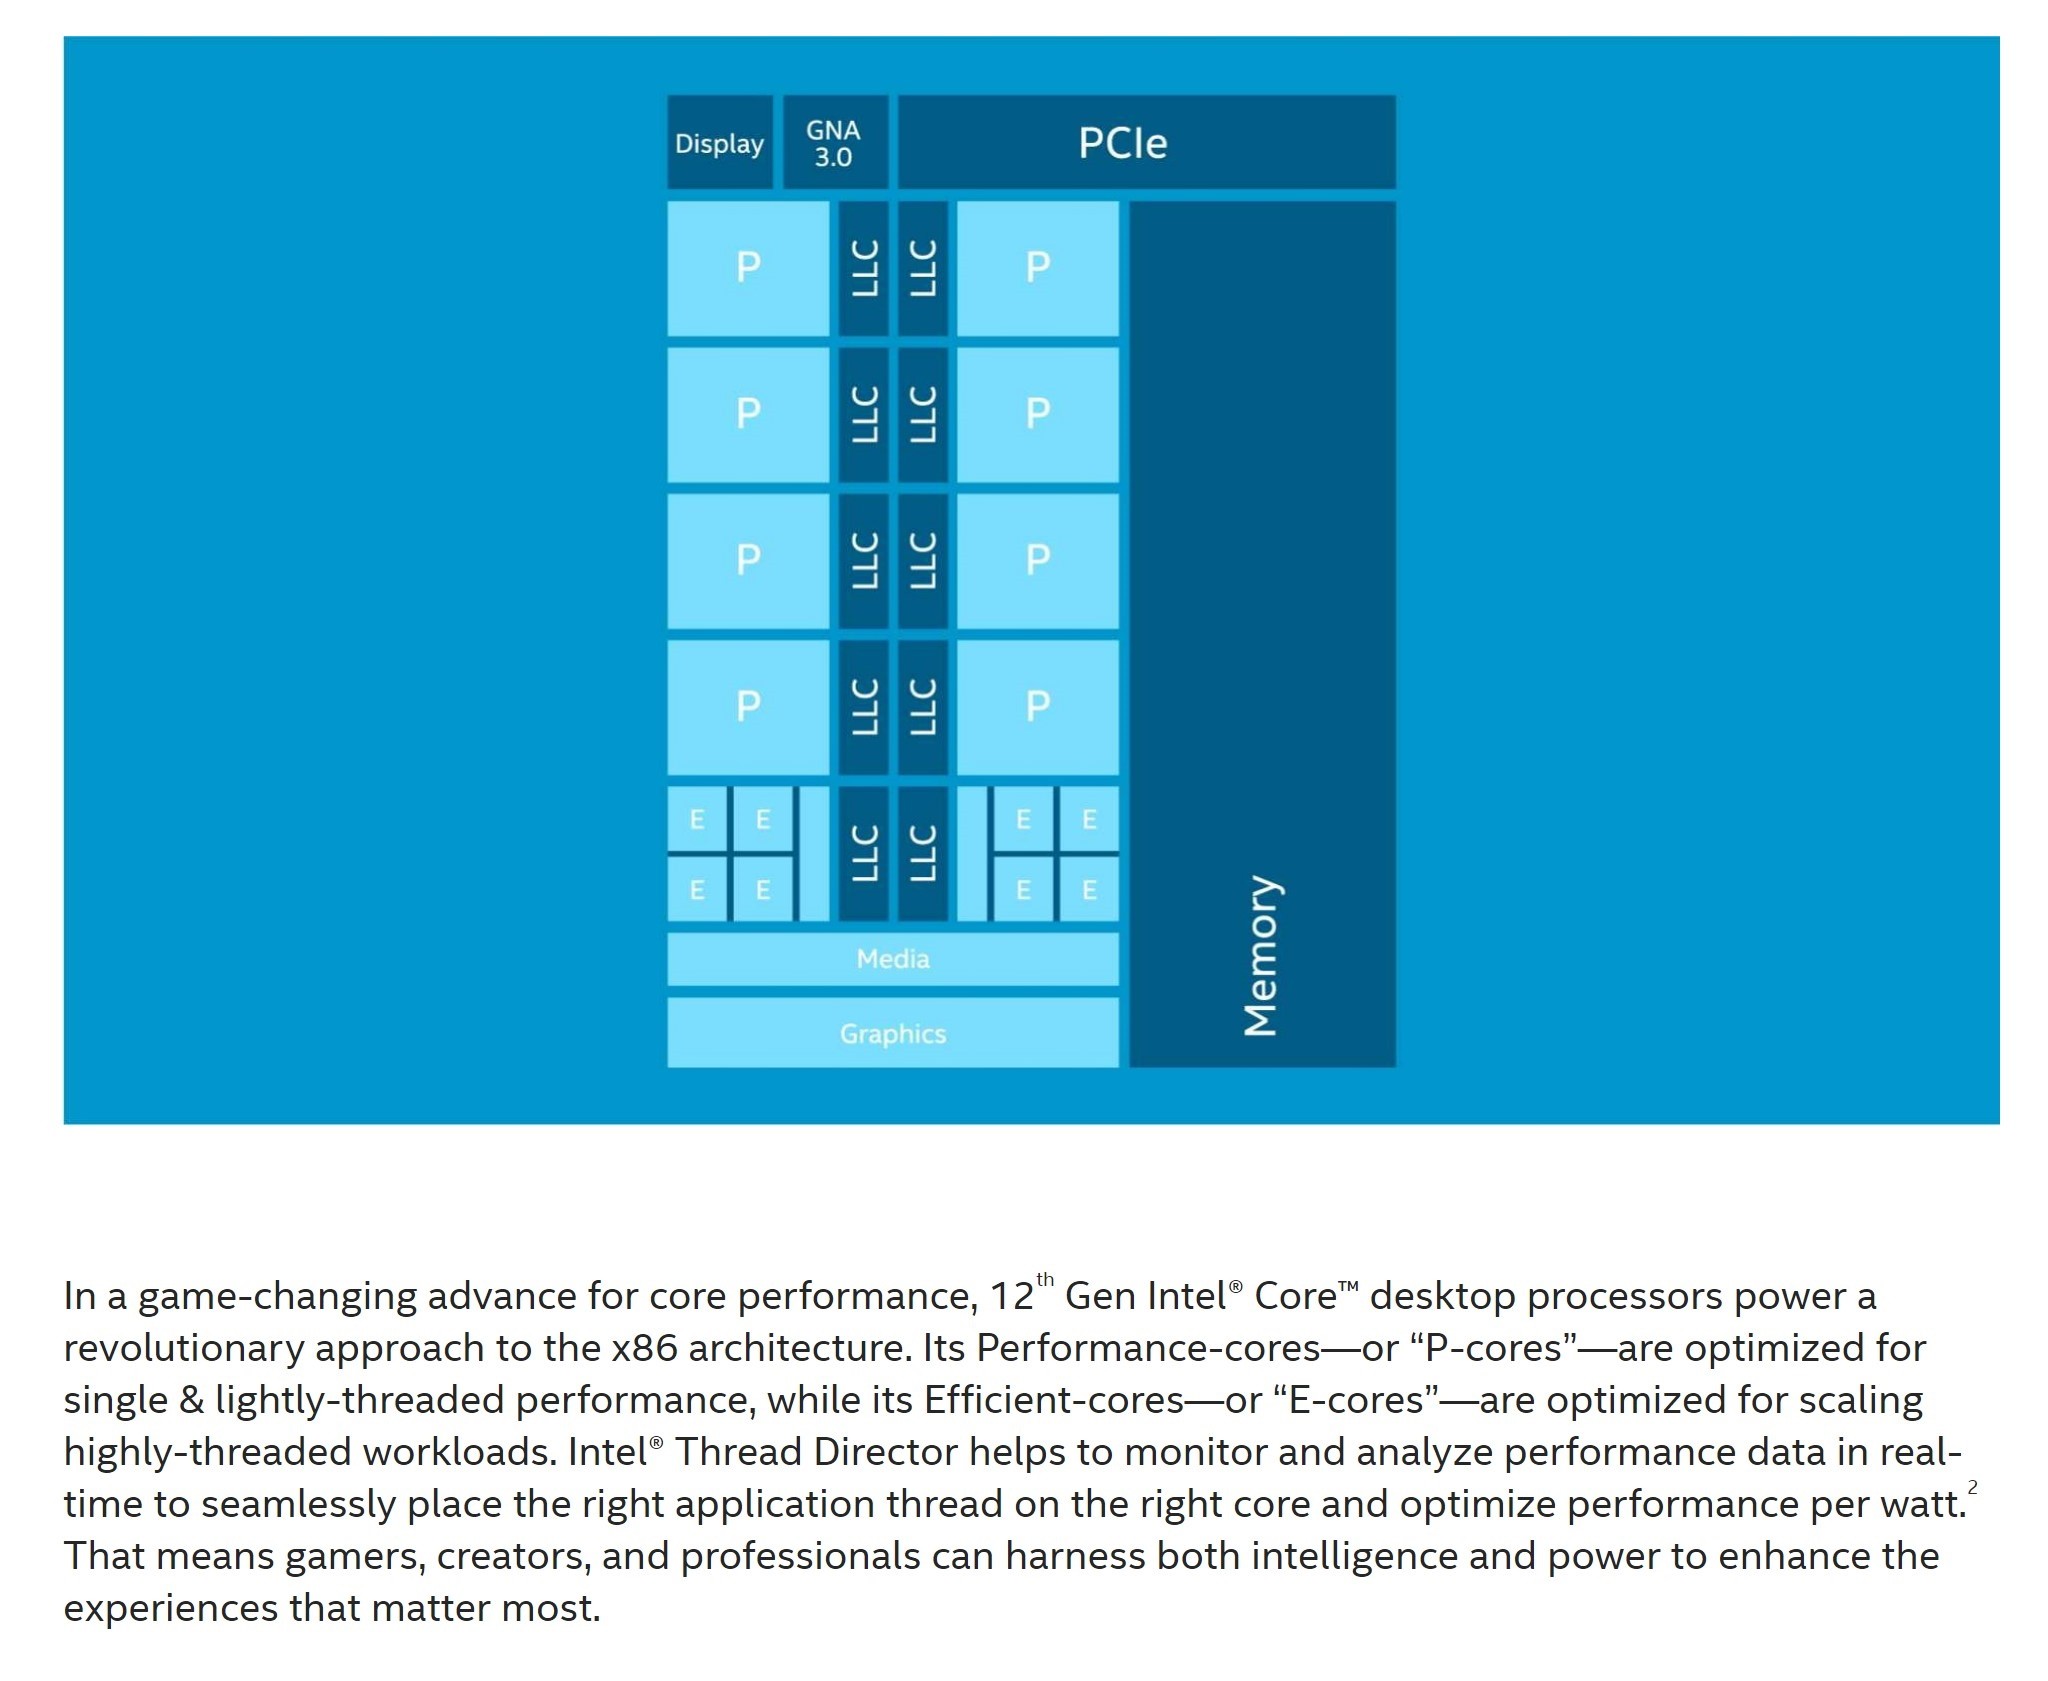 Intel performance effeciency cores explained